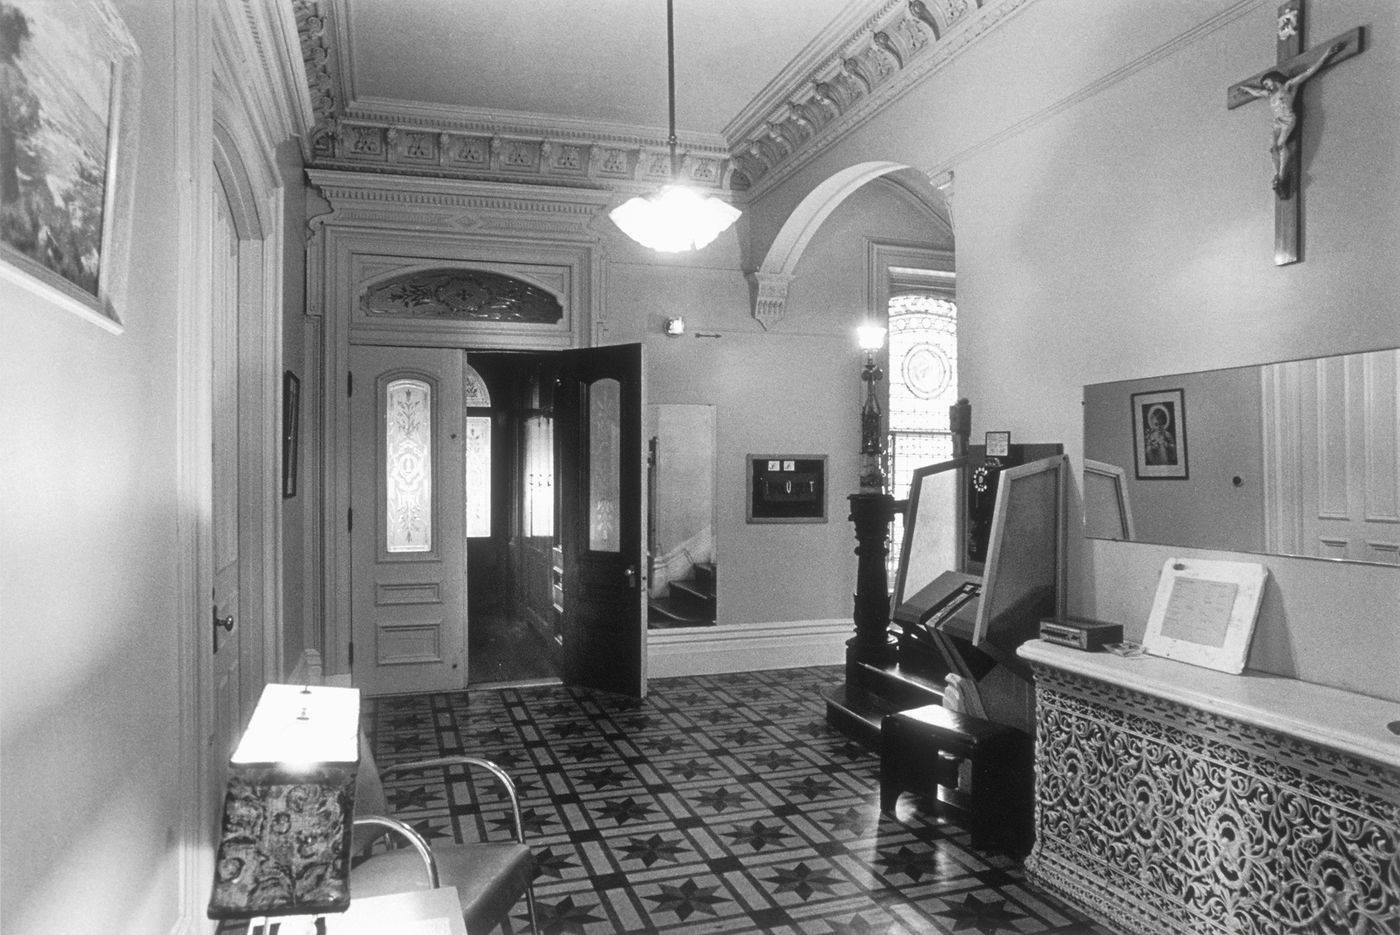 Interior view of the original entrance hall in the west part of Shaughnessy House, Montréal, Québec